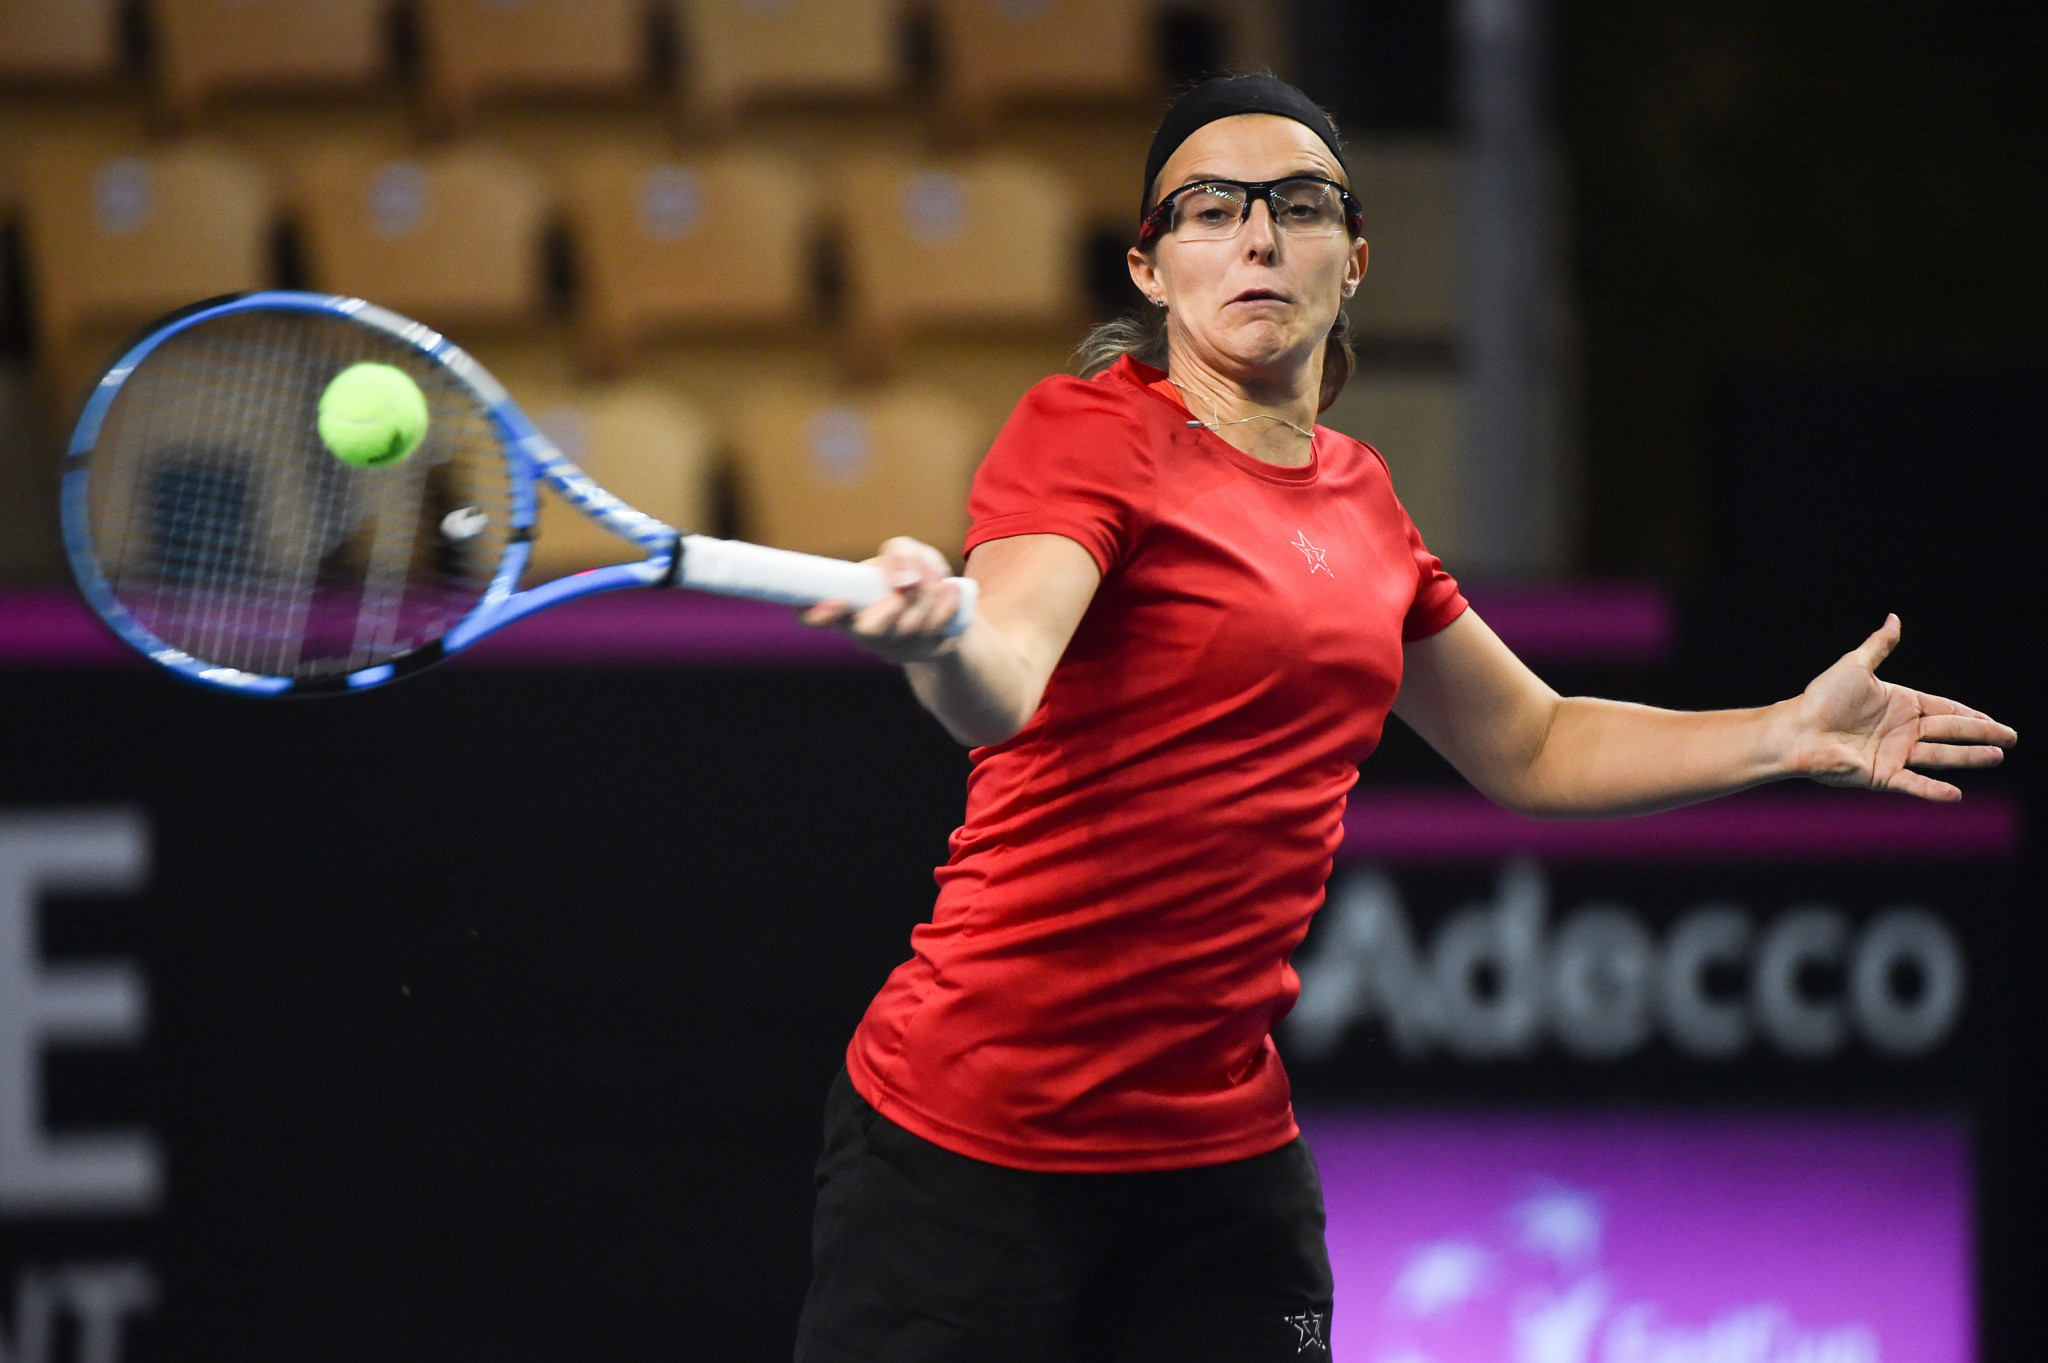 Flipkens earns second round place at Miami Open